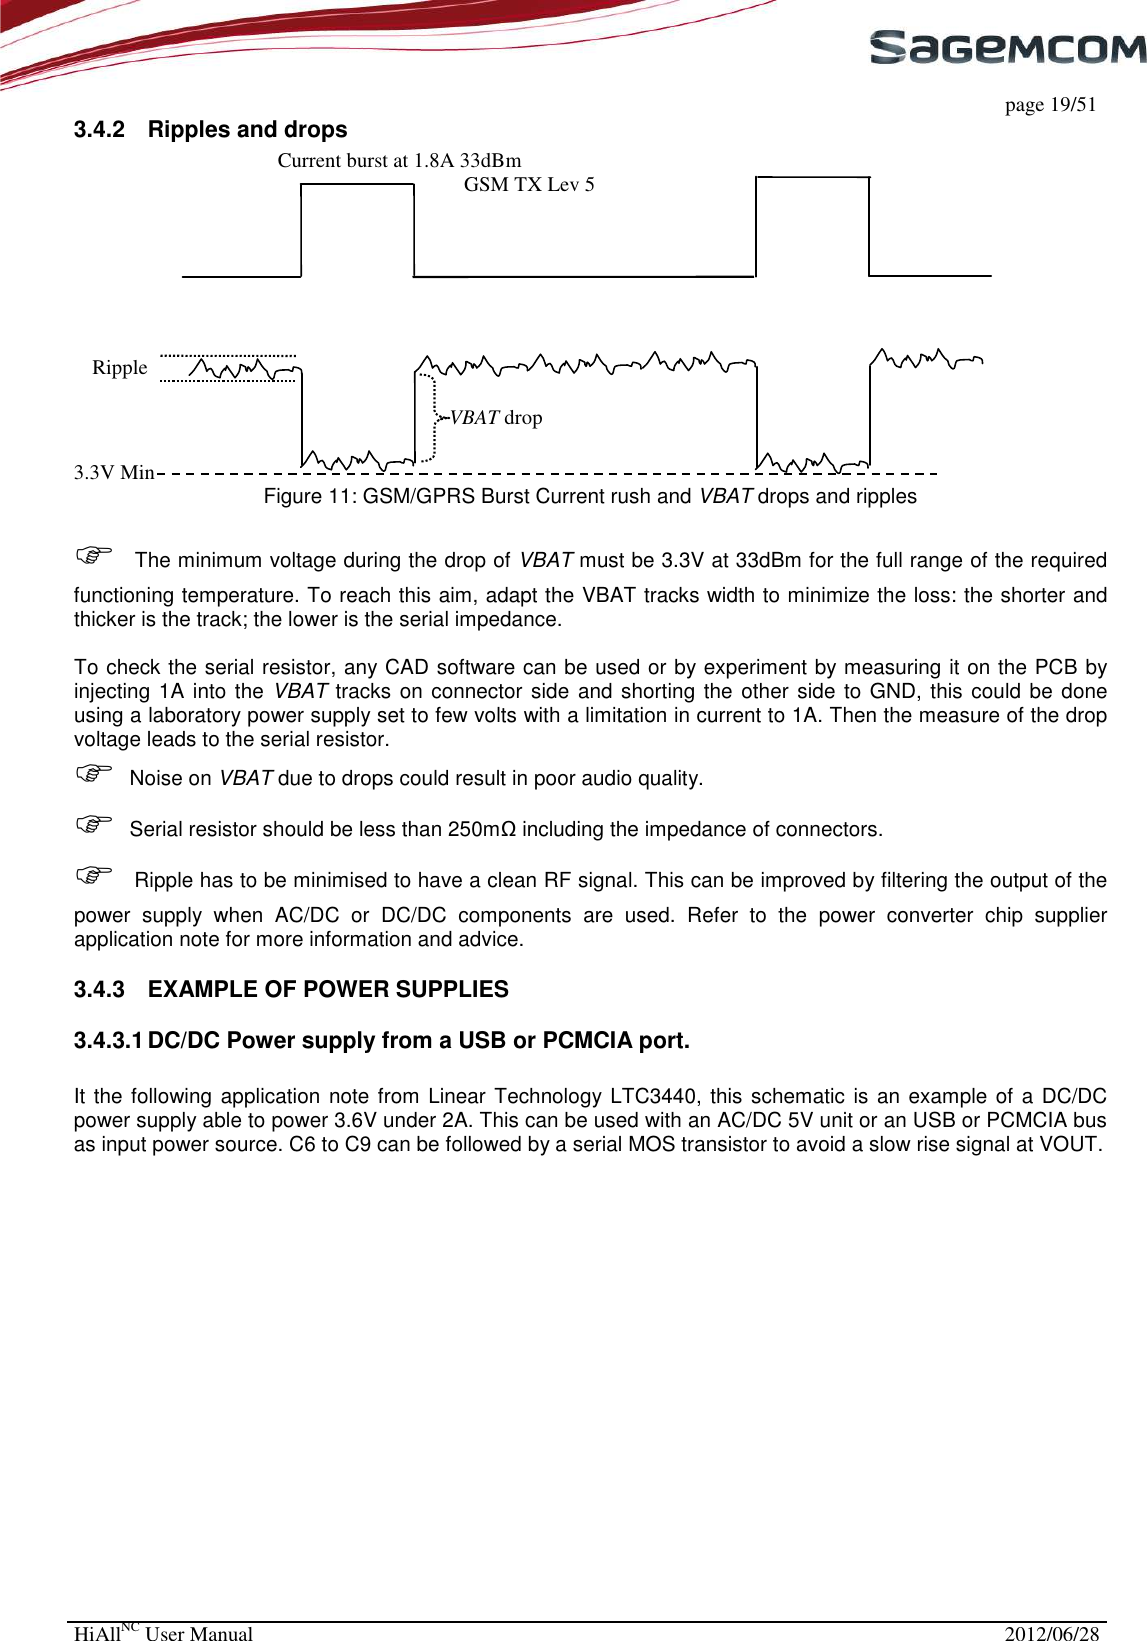     page 19/51 HiAllNC User Manual  2012/06/28  3.4.2  Ripples and drops  Figure 11: GSM/GPRS Burst Current rush and VBAT drops and ripples   The minimum voltage during the drop of VBAT must be 3.3V at 33dBm for the full range of the required functioning temperature. To reach this aim, adapt the VBAT tracks width to minimize the loss: the shorter and thicker is the track; the lower is the serial impedance.  To check the serial resistor, any CAD software can be used or by experiment by measuring it on the PCB by injecting 1A into the VBAT tracks  on connector side and shorting the other side to GND, this could be done using a laboratory power supply set to few volts with a limitation in current to 1A. Then the measure of the drop voltage leads to the serial resistor.   Noise on VBAT due to drops could result in poor audio quality.  Serial resistor should be less than 250mΩ including the impedance of connectors.  Ripple has to be minimised to have a clean RF signal. This can be improved by filtering the output of the power  supply  when  AC/DC  or  DC/DC  components  are  used.  Refer  to  the  power  converter  chip  supplier application note for more information and advice. 3.4.3  EXAMPLE OF POWER SUPPLIES 3.4.3.1 DC/DC Power supply from a USB or PCMCIA port.  It the following application  note from Linear Technology LTC3440, this schematic  is an example of a DC/DC power supply able to power 3.6V under 2A. This can be used with an AC/DC 5V unit or an USB or PCMCIA bus as input power source. C6 to C9 can be followed by a serial MOS transistor to avoid a slow rise signal at VOUT. 3.3V Min Ripple VBAT drop Current burst at 1.8A 33dBm GSM TX Lev 5 